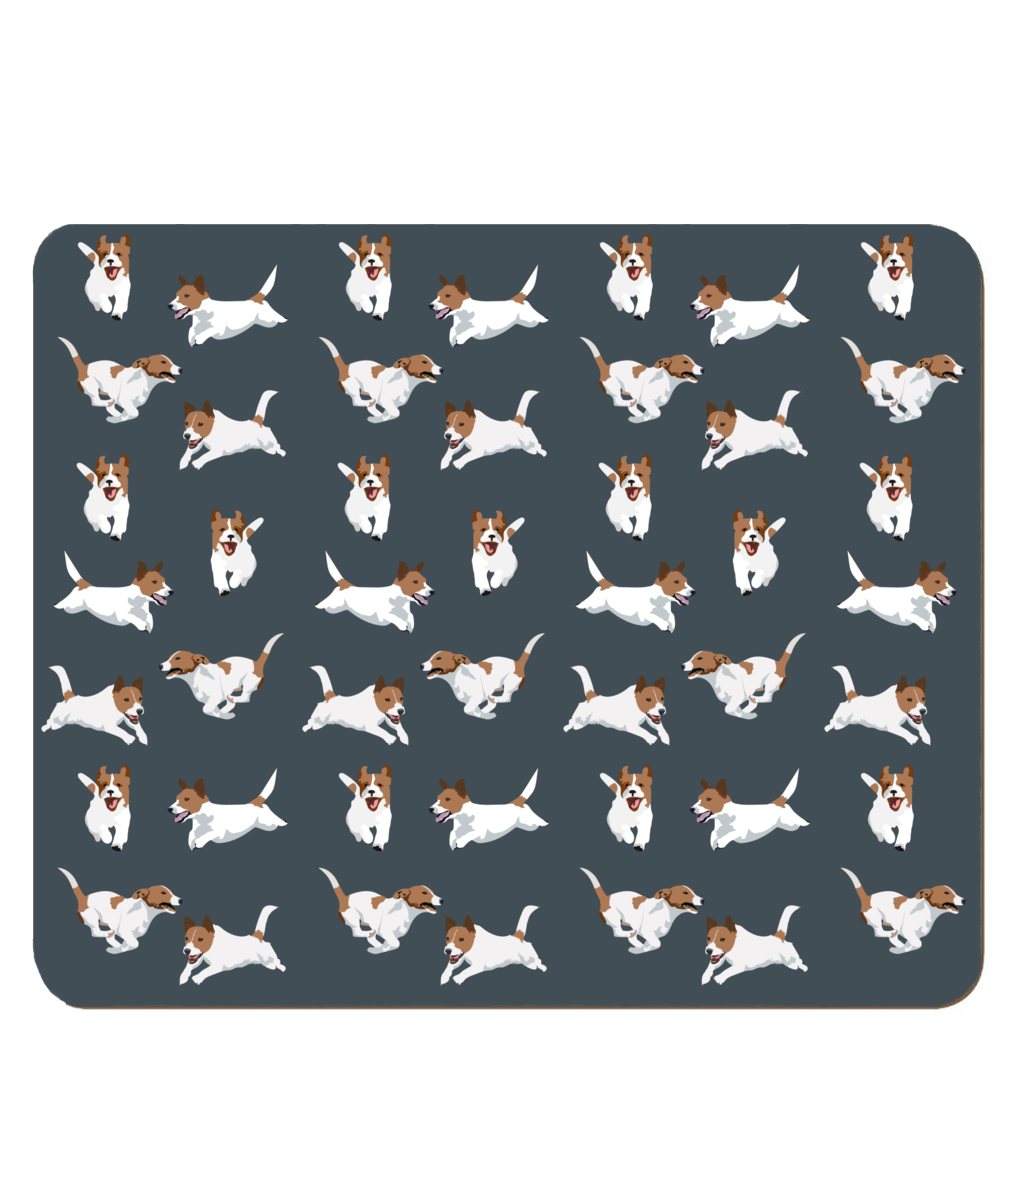 Jack Russell Placemat in Dark Grey-Blue